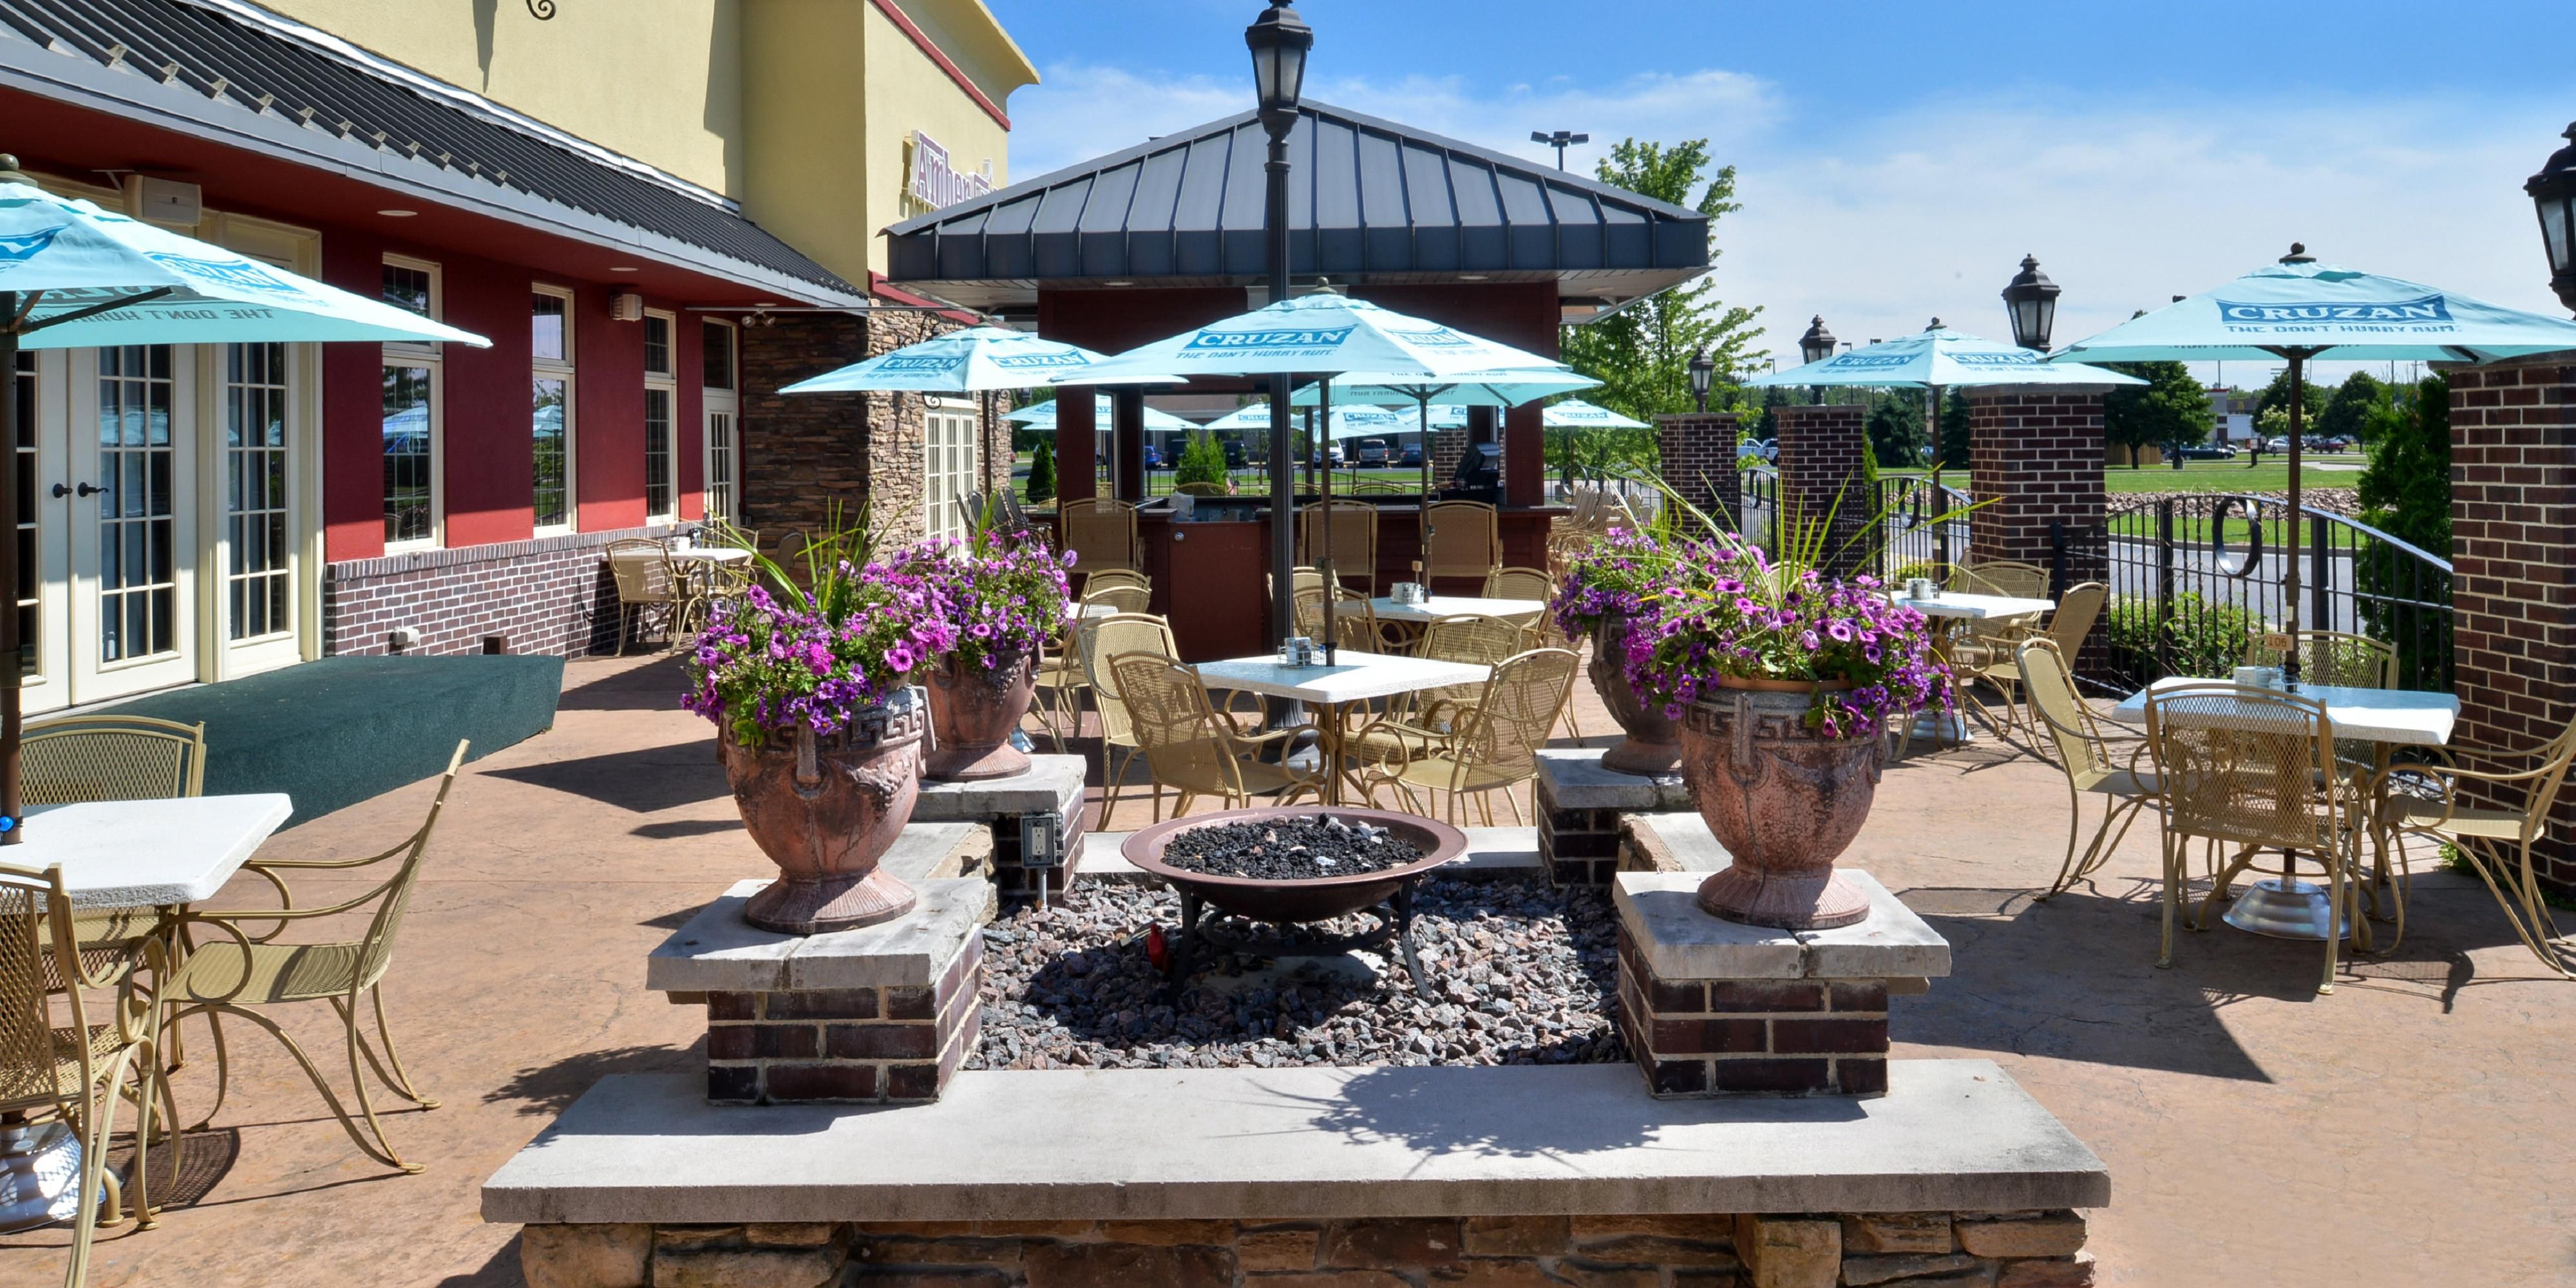 Relax and enjoy the view at Amber Grill outside patio.